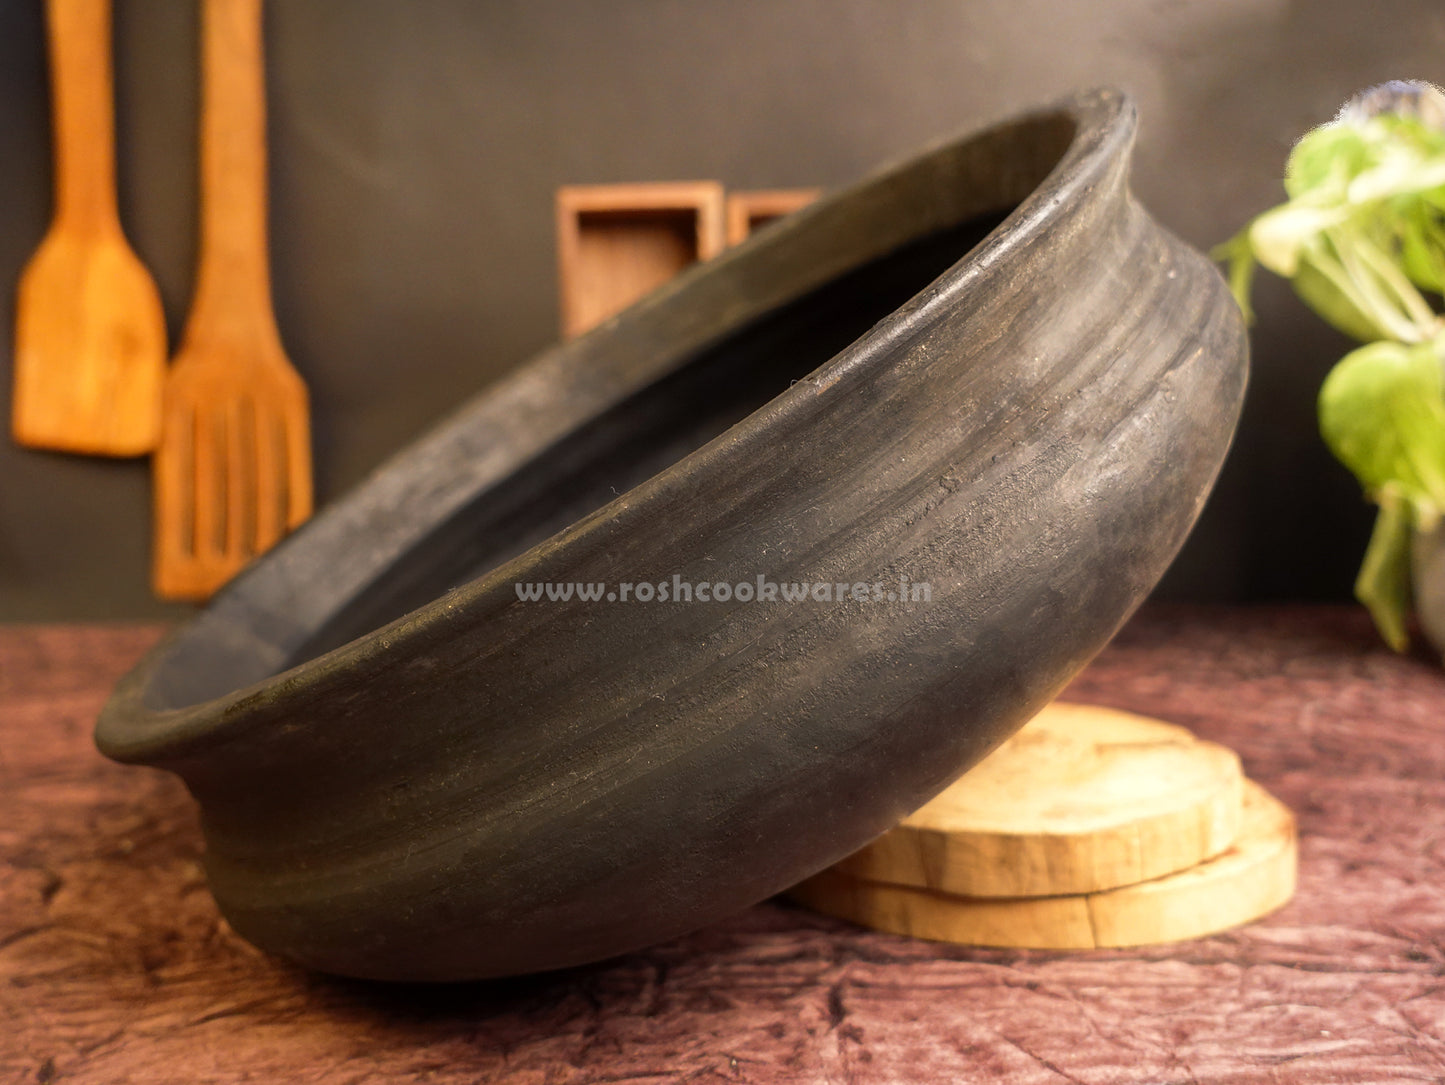 Clay - Handi/Pot - Cooking and Serving - Black.